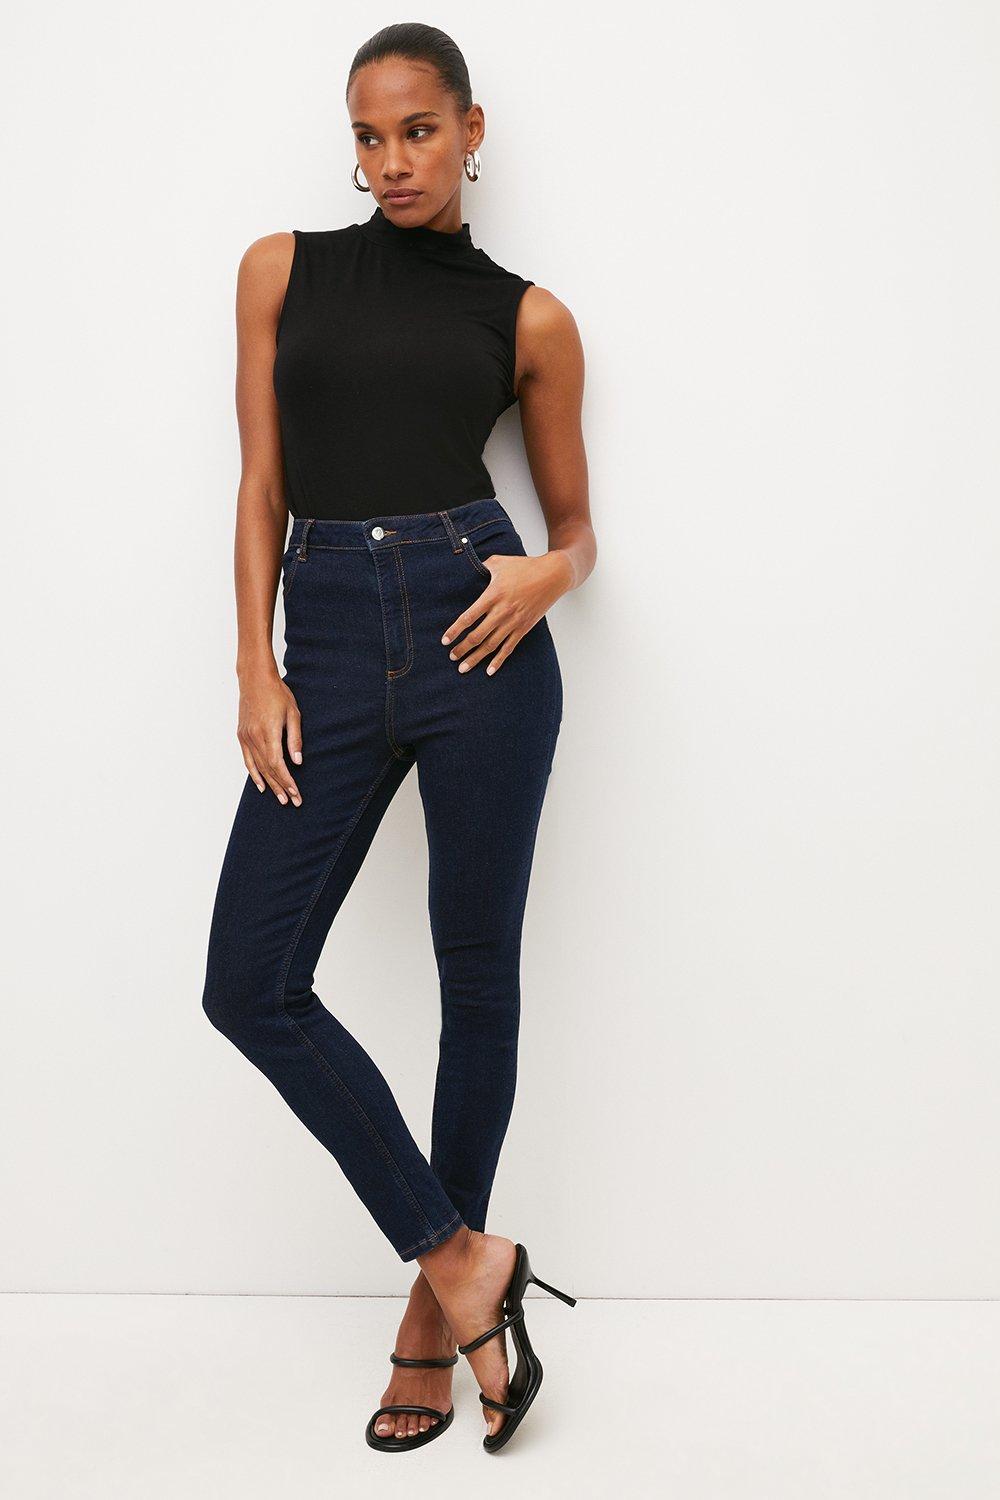 Missguided Blue High Waisted Ripped Jeggings, $40, Missguided